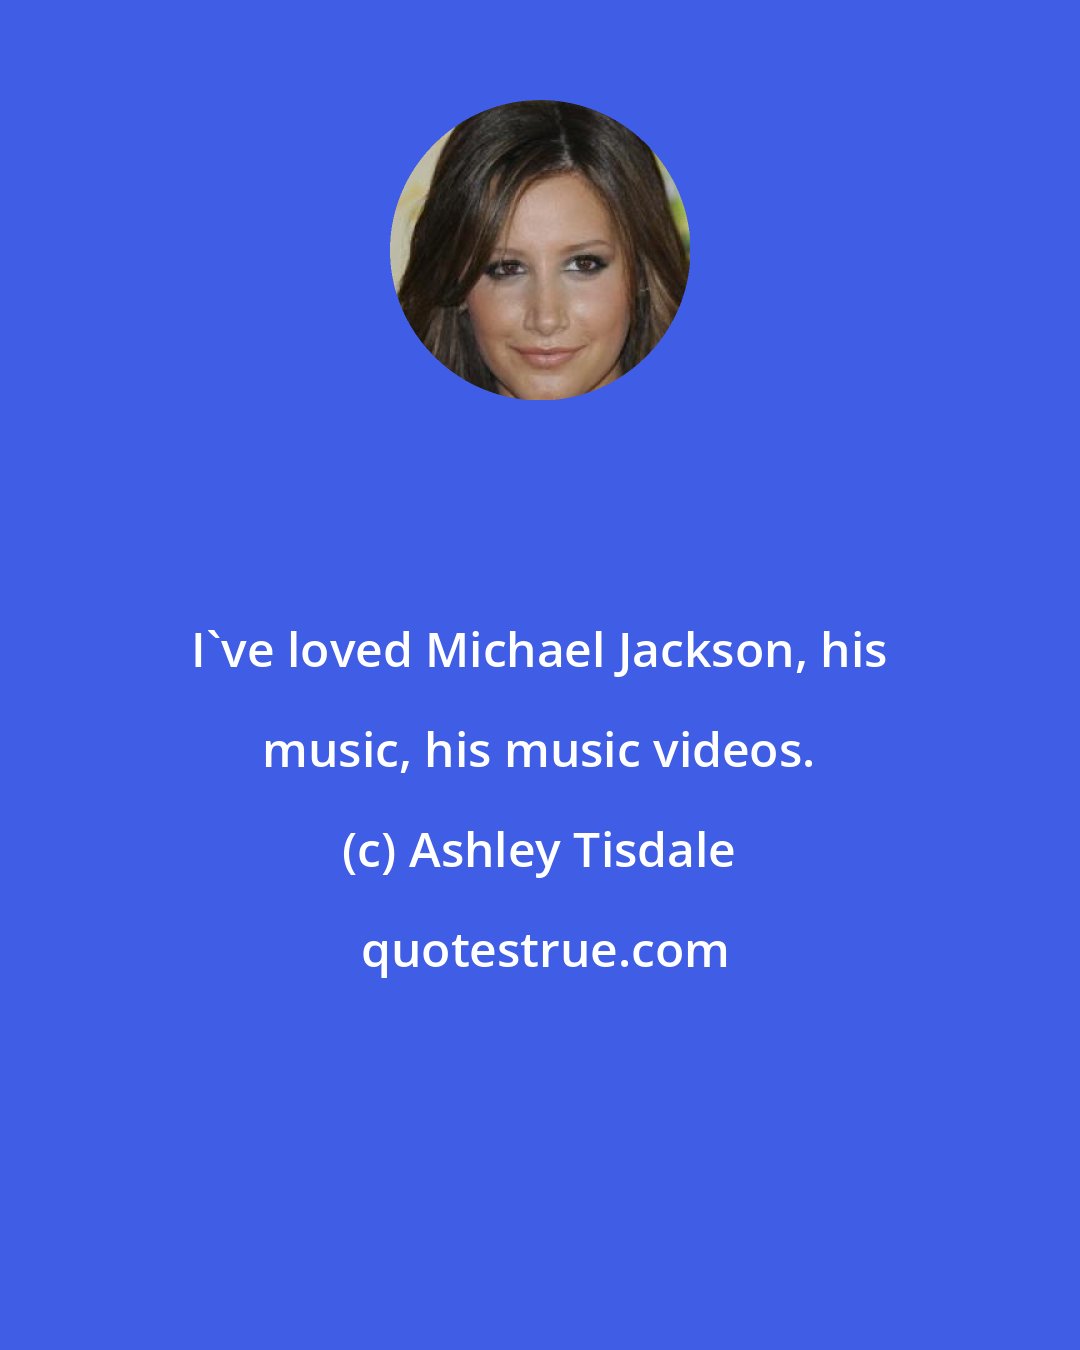 Ashley Tisdale: I've loved Michael Jackson, his music, his music videos.